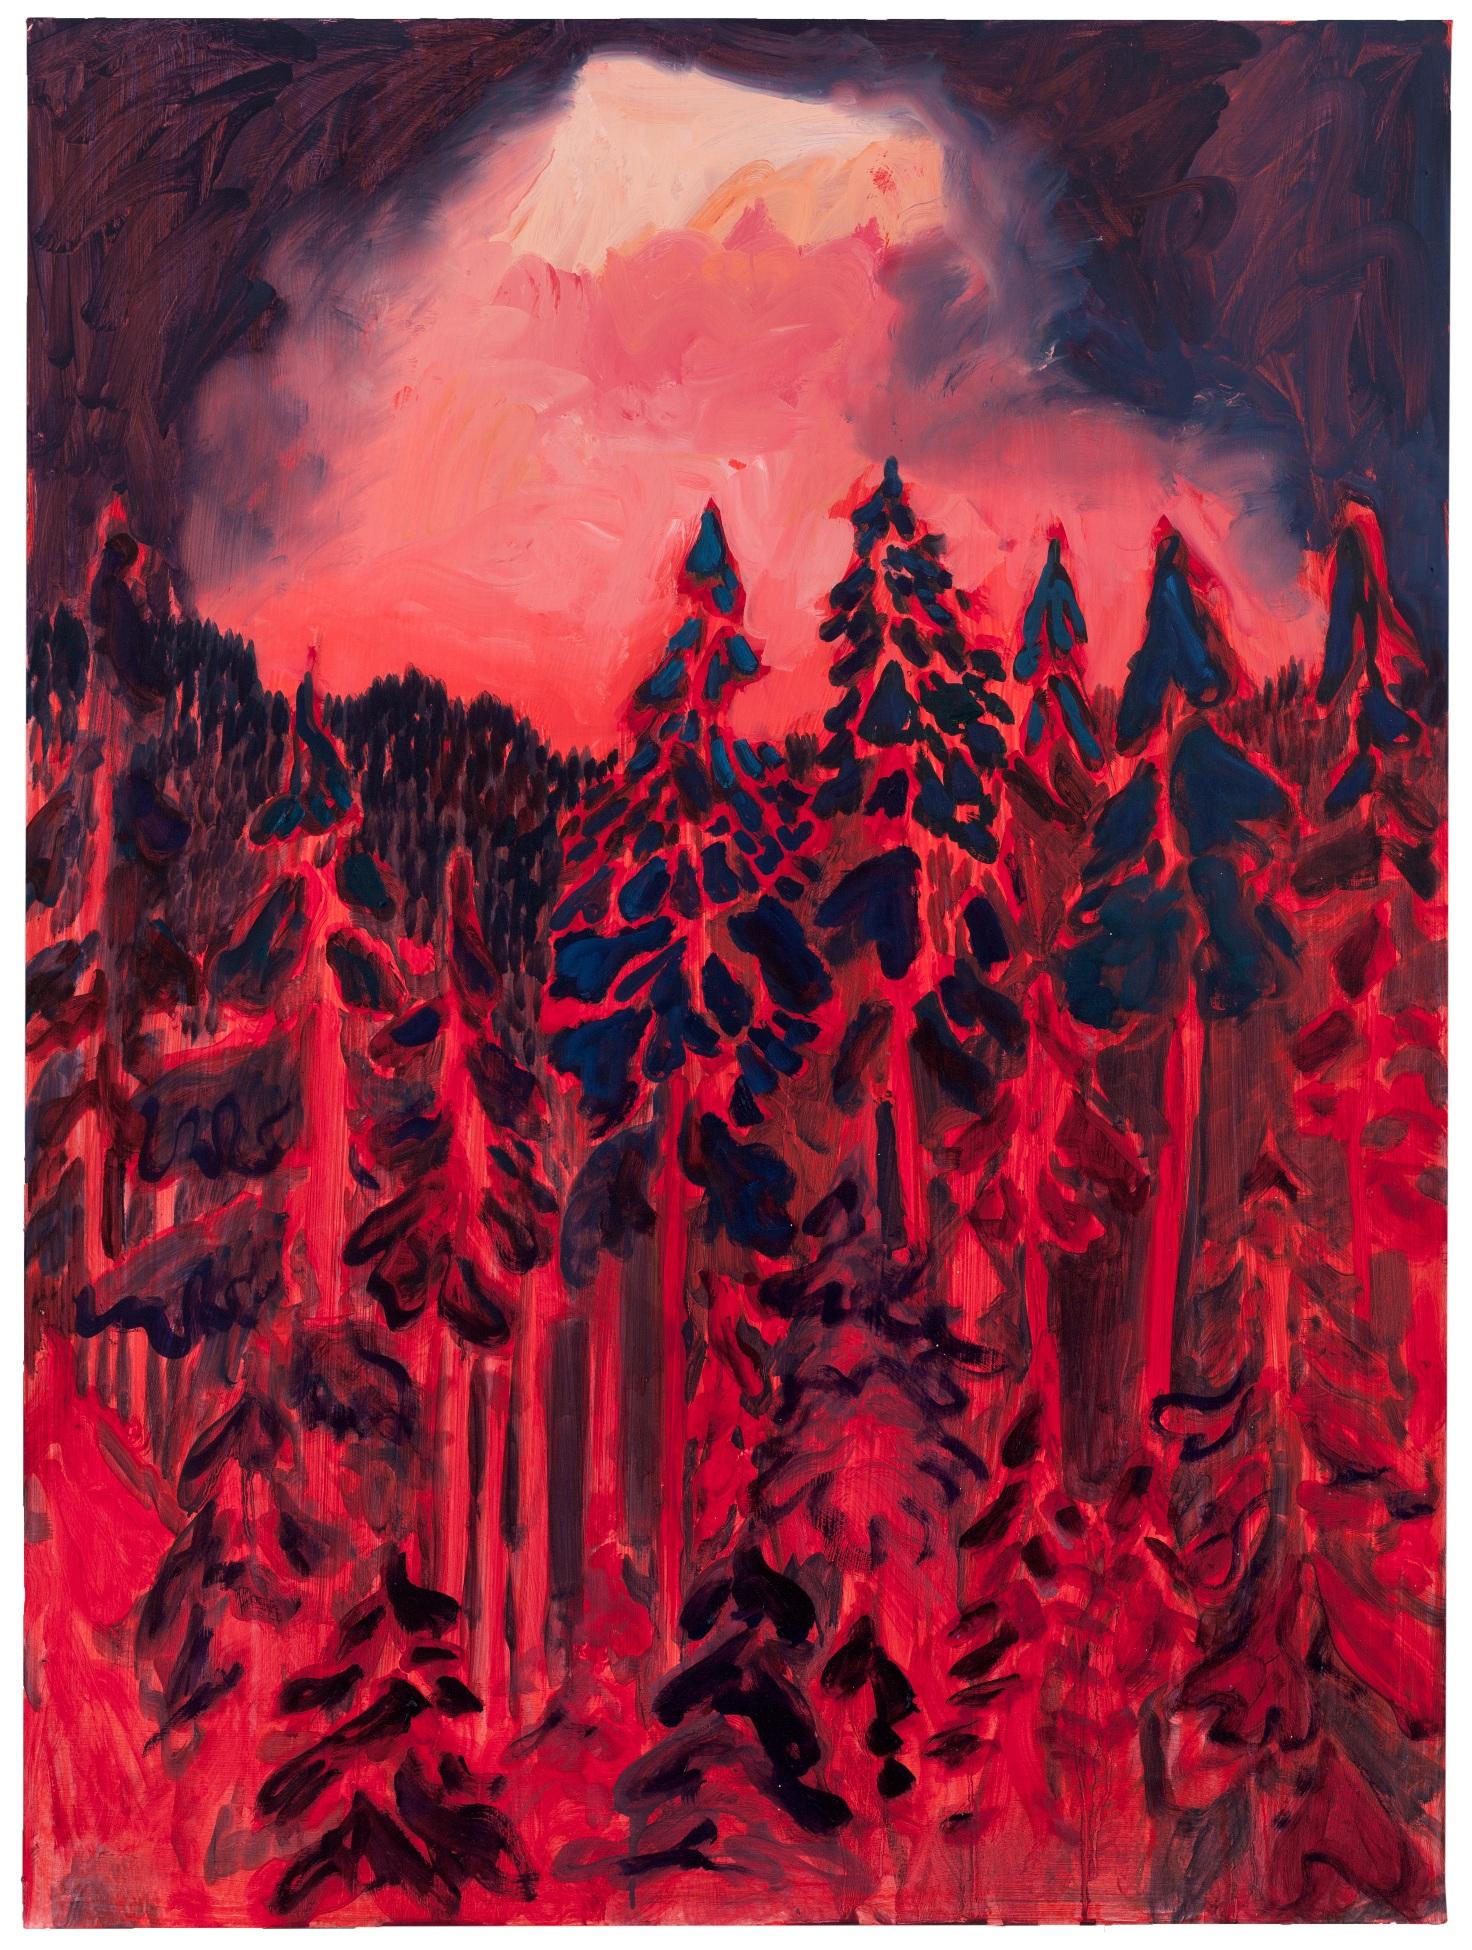 Dixie Fire - Painting by Danielle Winger